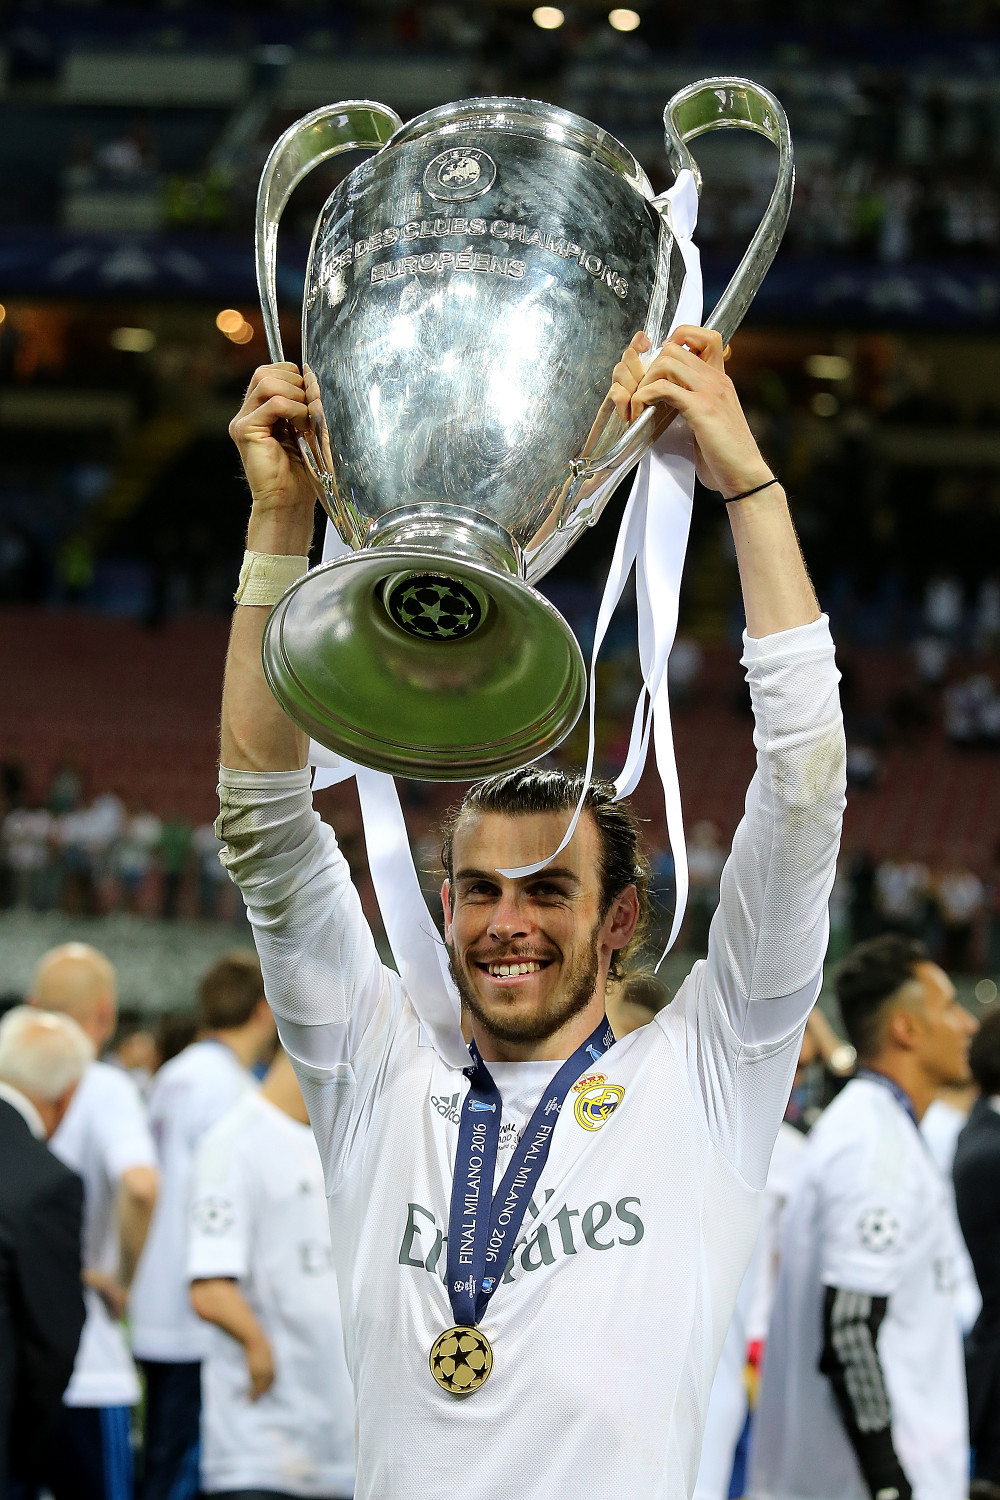 MILAN, ITALY - MAY 28: Gareth Bale of Real Madrid lifts the trophy following his team's victory in a penalty shootout during the UEFA Champions League final match between Real Madrid and Club Atletico de Madrid at Stadio Giuseppe Meazza on May 28, 2016 in Milan, Italy. (Photo by Matthew Ashton - AMA/Getty Images)